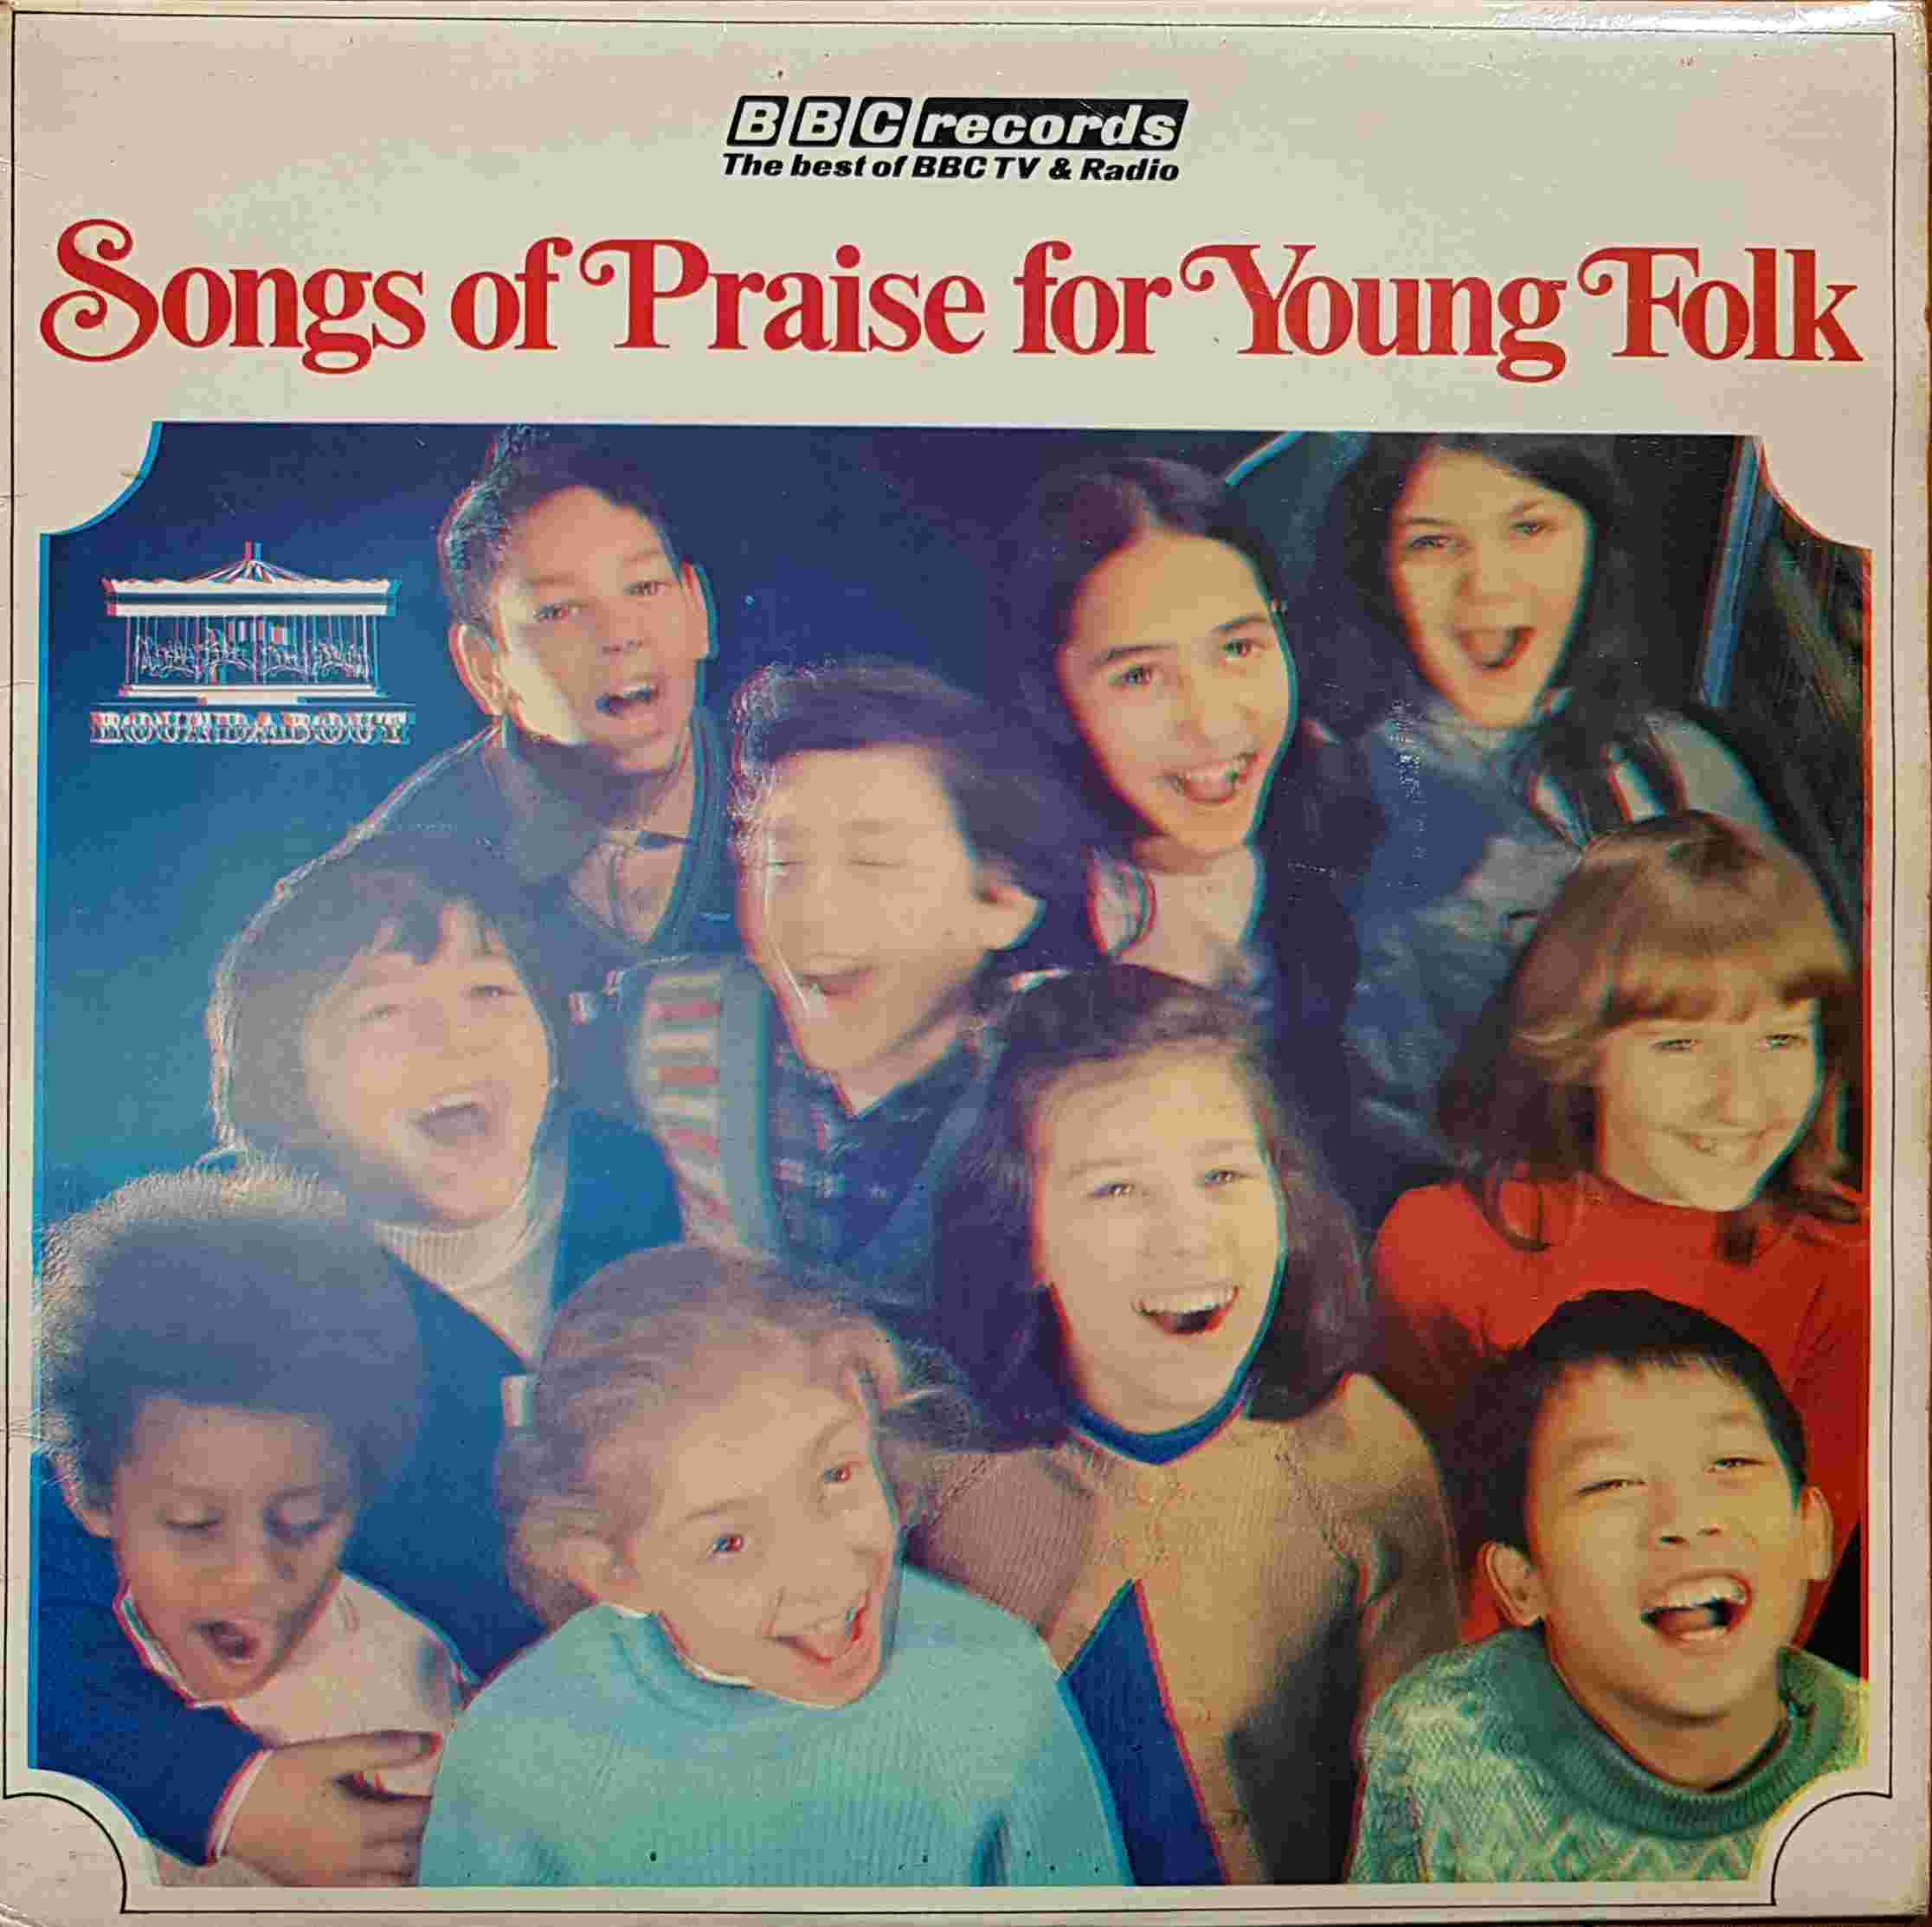 Picture of RBT 21 Songs of praise for young folk by artist Various from the BBC albums - Records and Tapes library